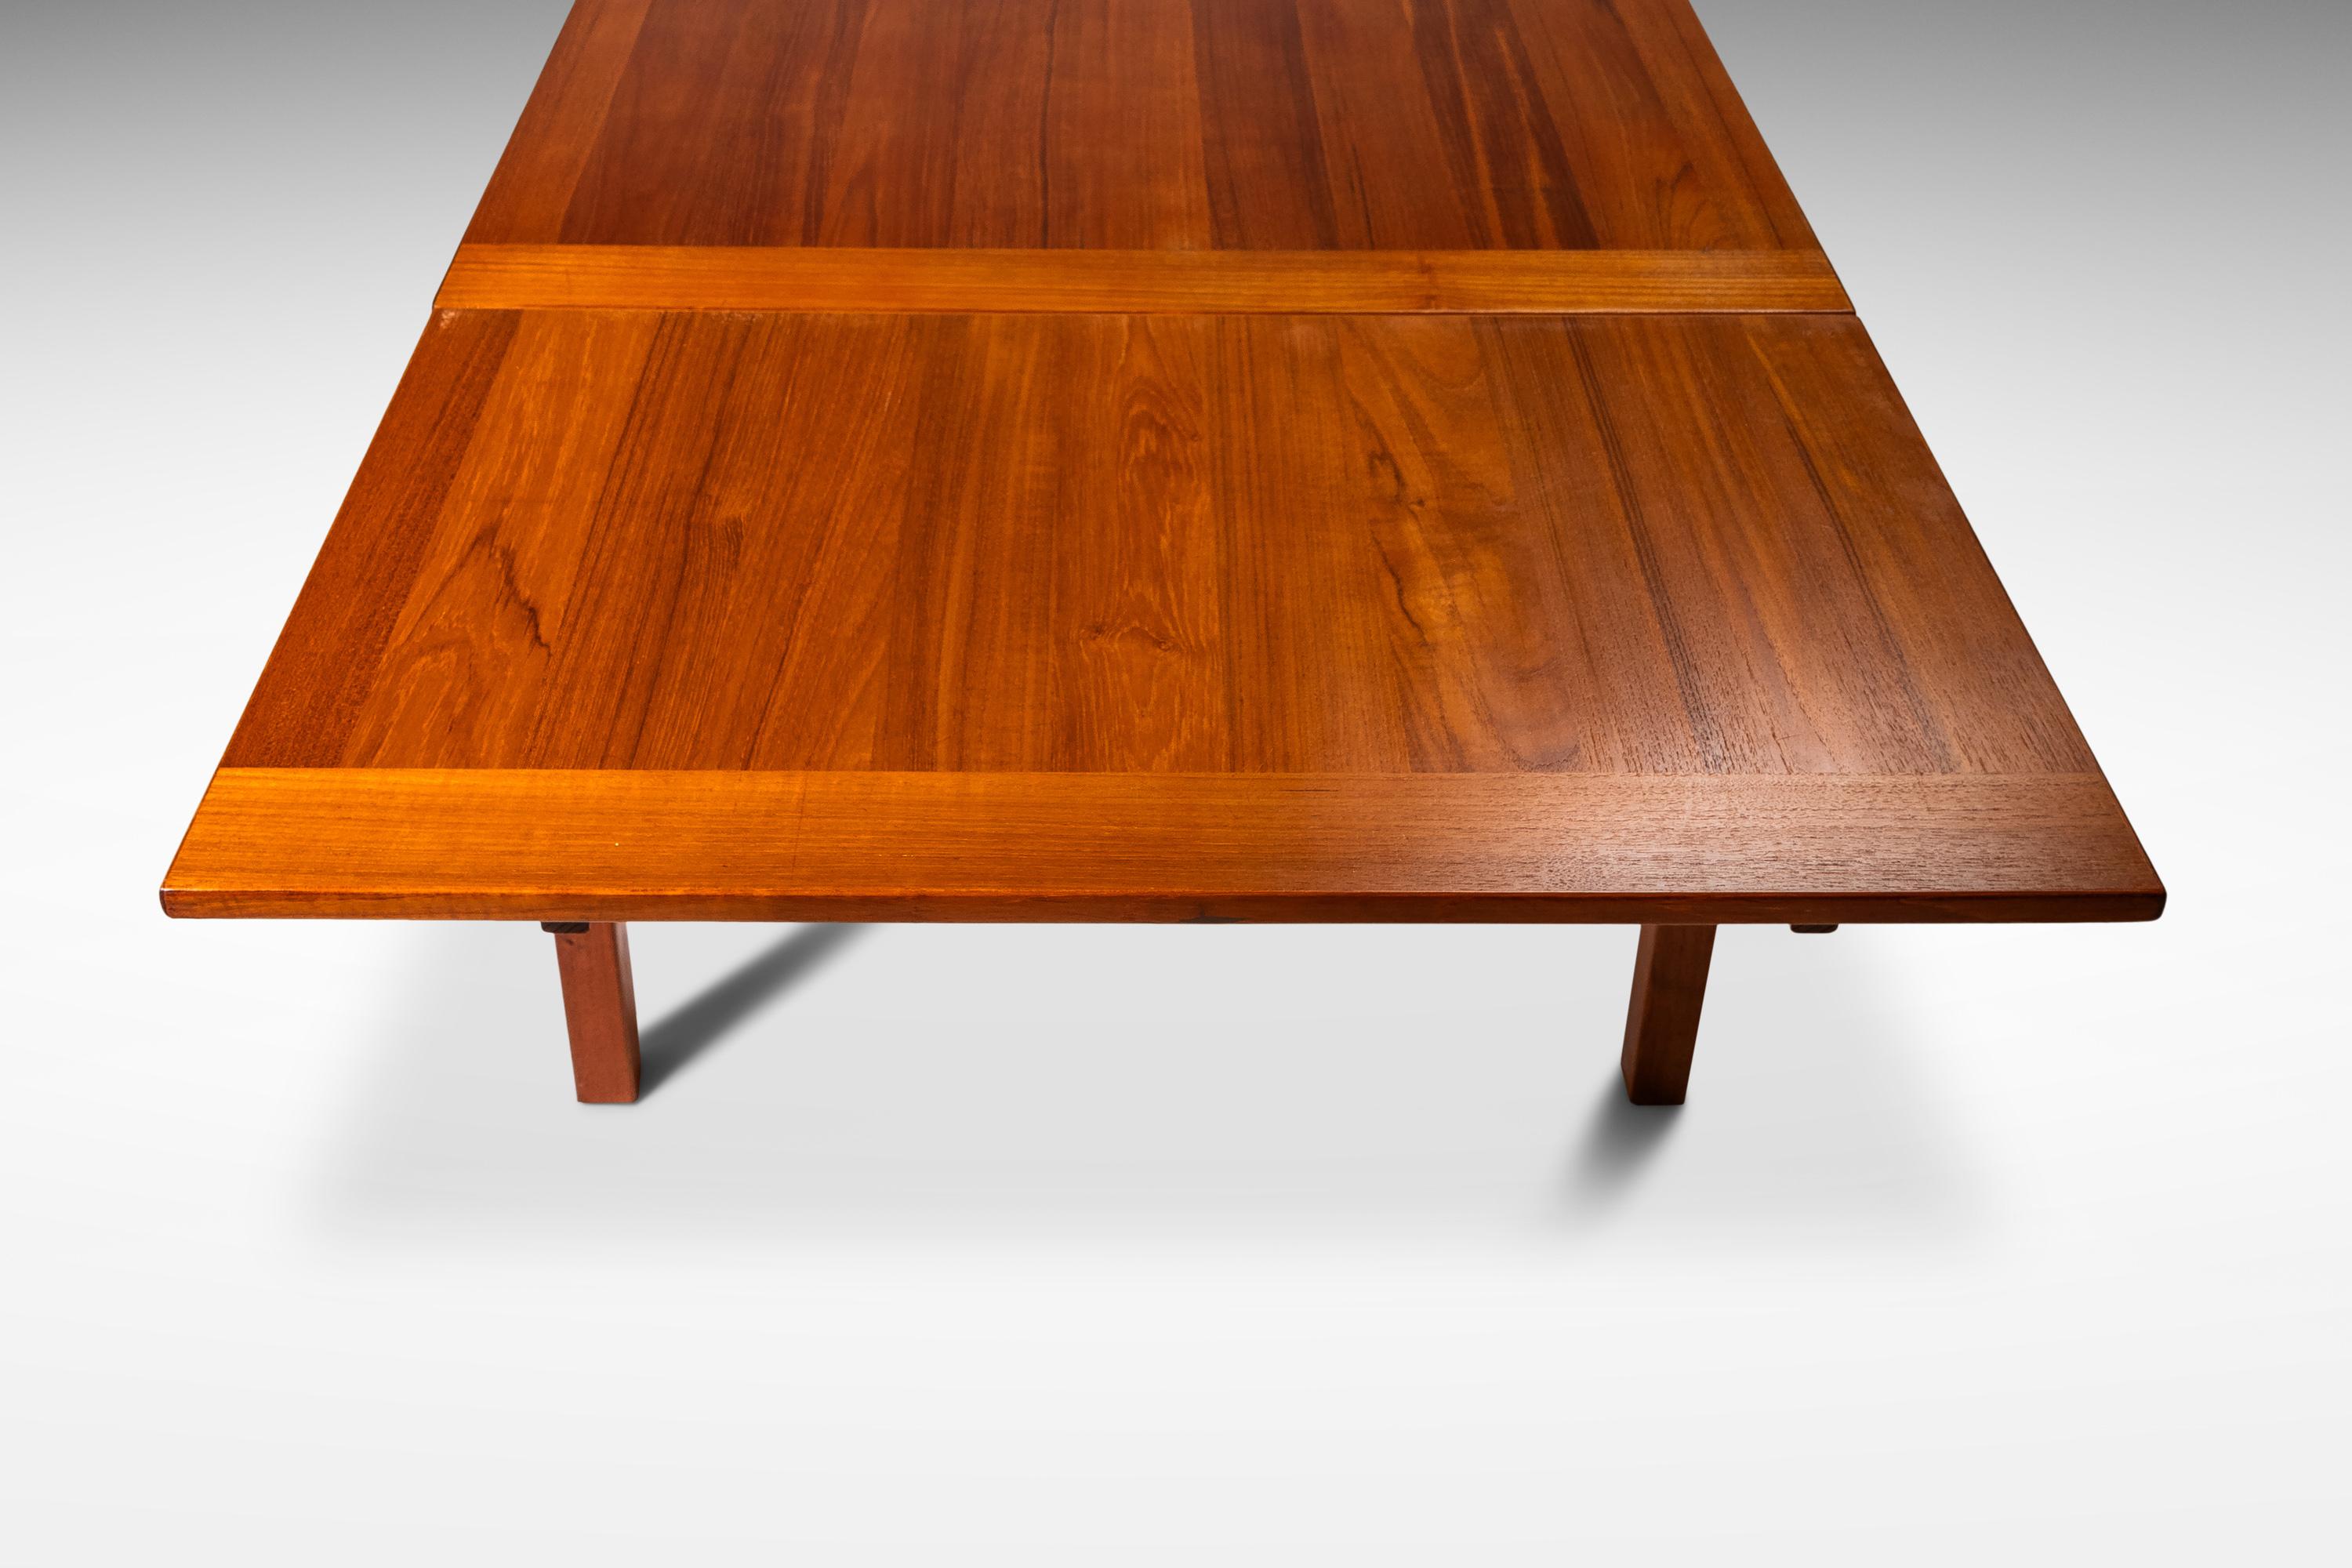 Danish Teak Extension Dining Table with Stow-in-Table Leaves, Denmark, c. 1970s For Sale 4